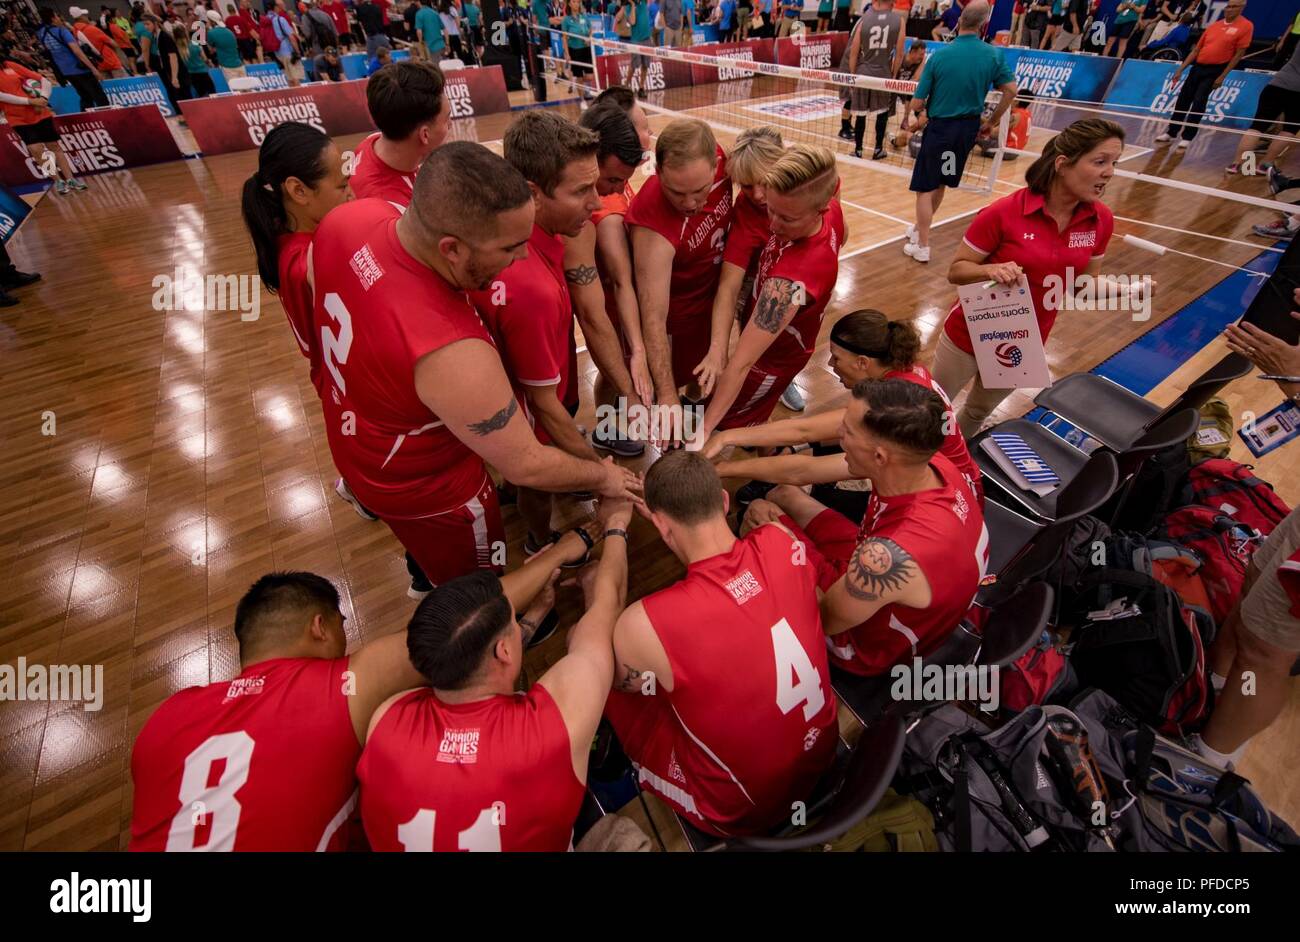 Competitors of Team Marine Corps get hyped up before their DoD Warrior Games sitting volleyball game, June 4, 2018, at the U.S. Air Force Academy in Colorado Springs, Colorado. The Warrior Games are an annual event, established in 2010, to introduce wounded, ill and injured service members to adaptive sports as a way to enhance their recovery and rehabilitation. Stock Photo